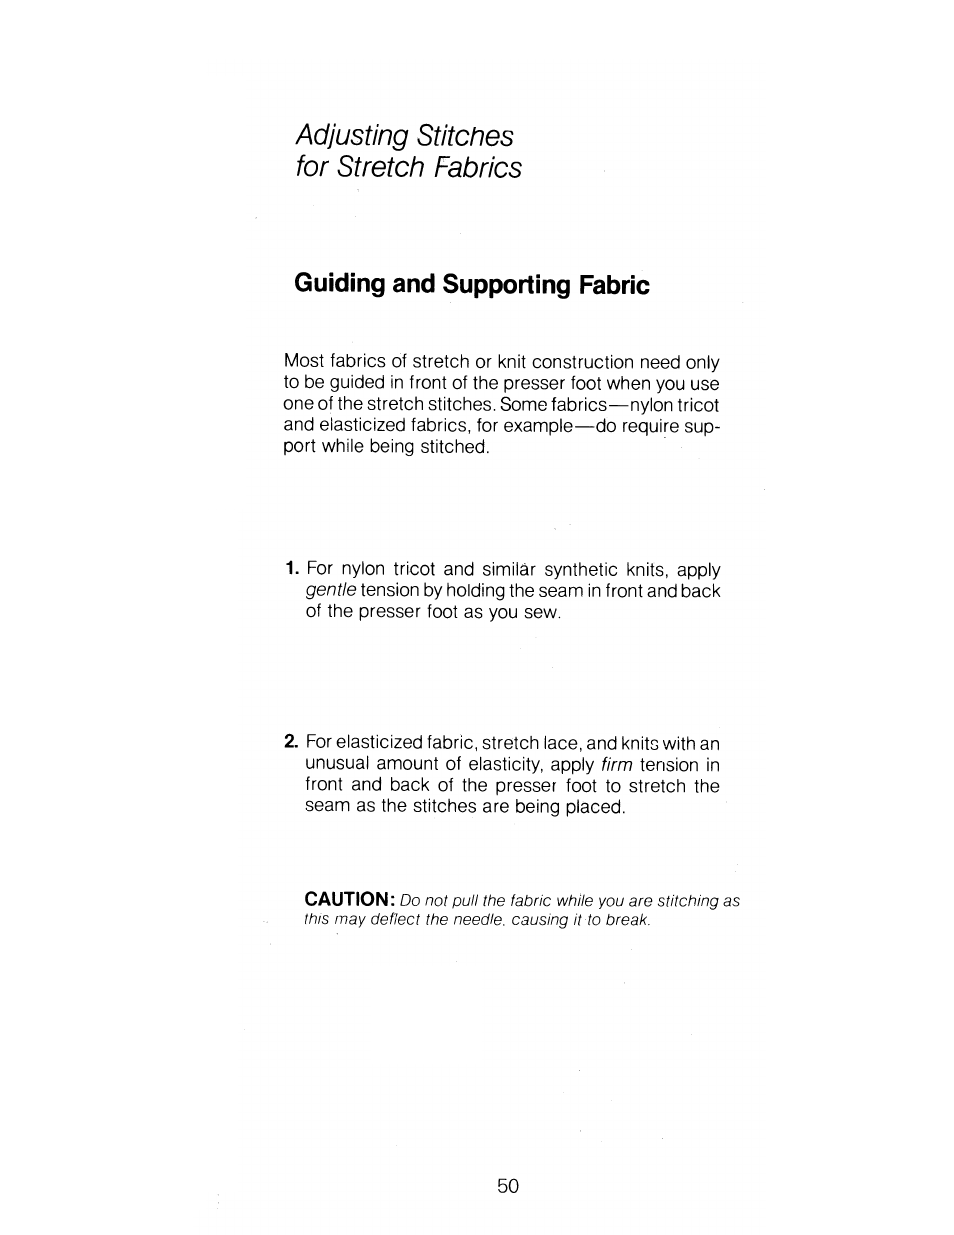 Adjusting stitches for stretch fabrics, Guiding and supporting fabric | SINGER 1288 User Manual | Page 51 / 89